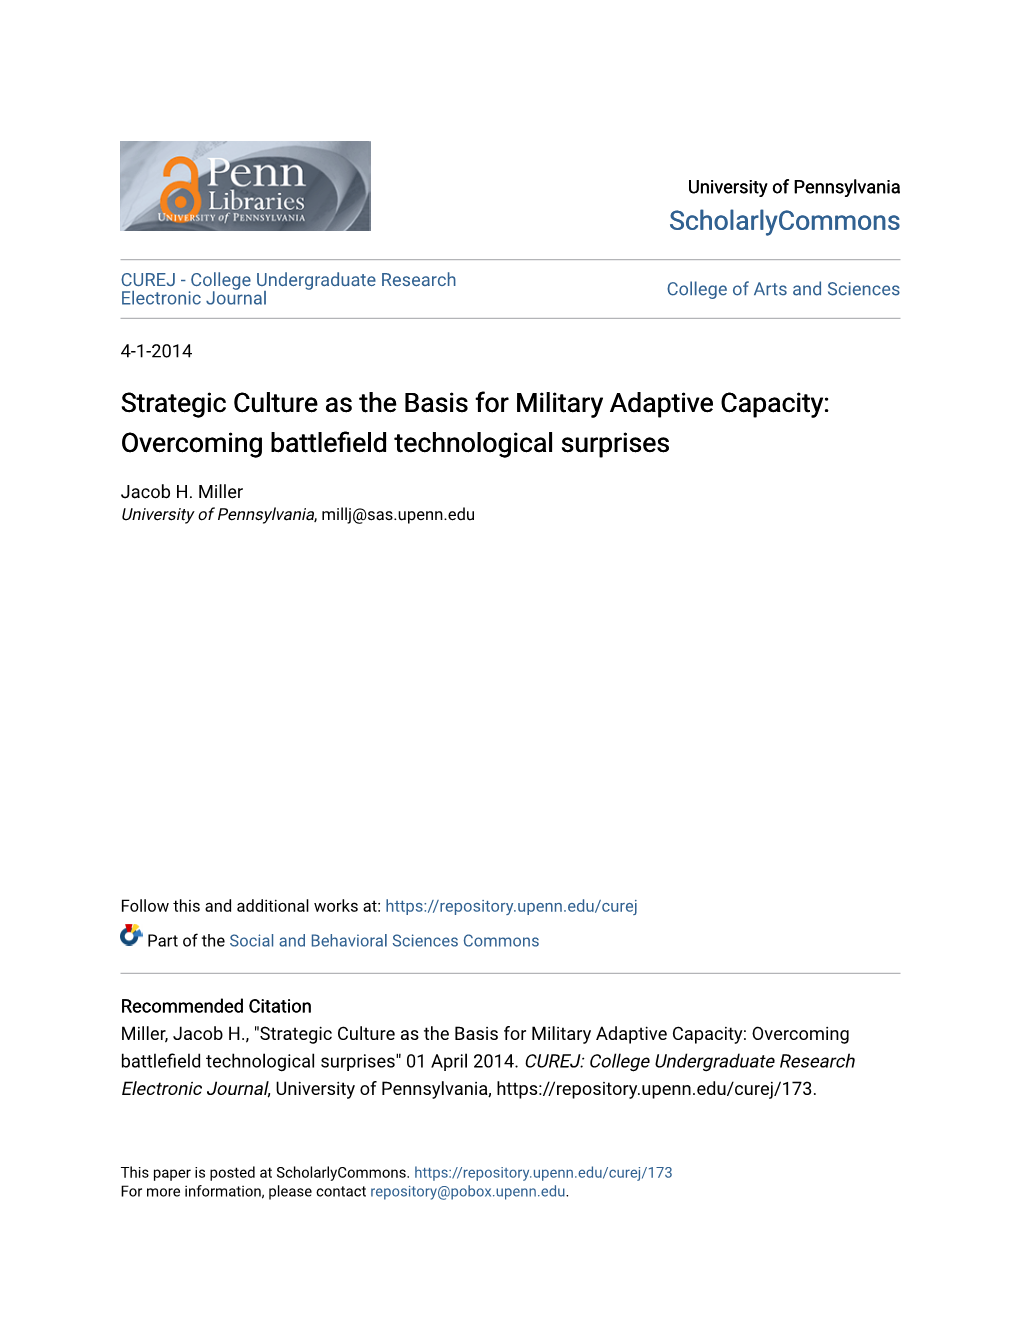 Strategic Culture As the Basis for Military Adaptive Capacity: Overcoming Battlefield Technological Surprises